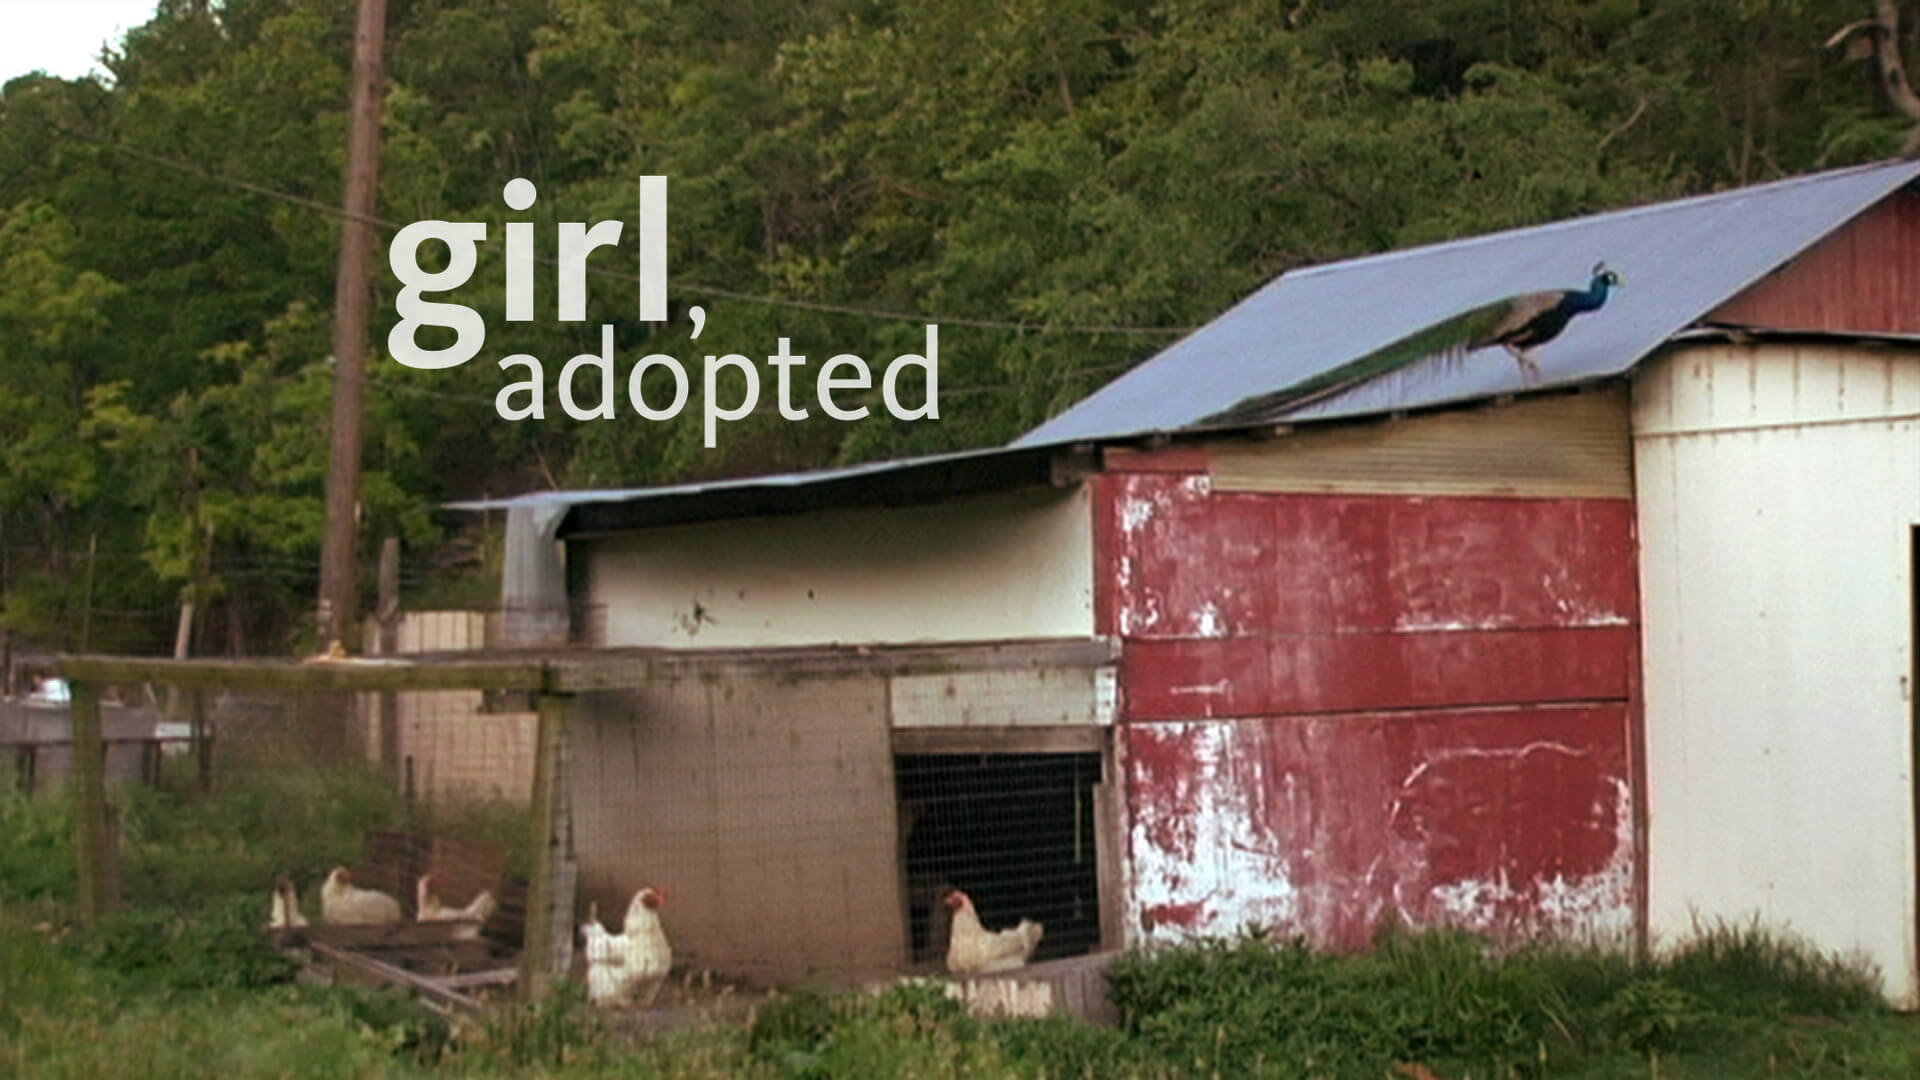 Title frame from Girl Adopted. A barn structure made of sheet metal. A peacock is walking on the roof. In the front part of the strucutre, there are several chickens in a wire mesh enclosure. The image also contains text at the top that shows the title of the film.